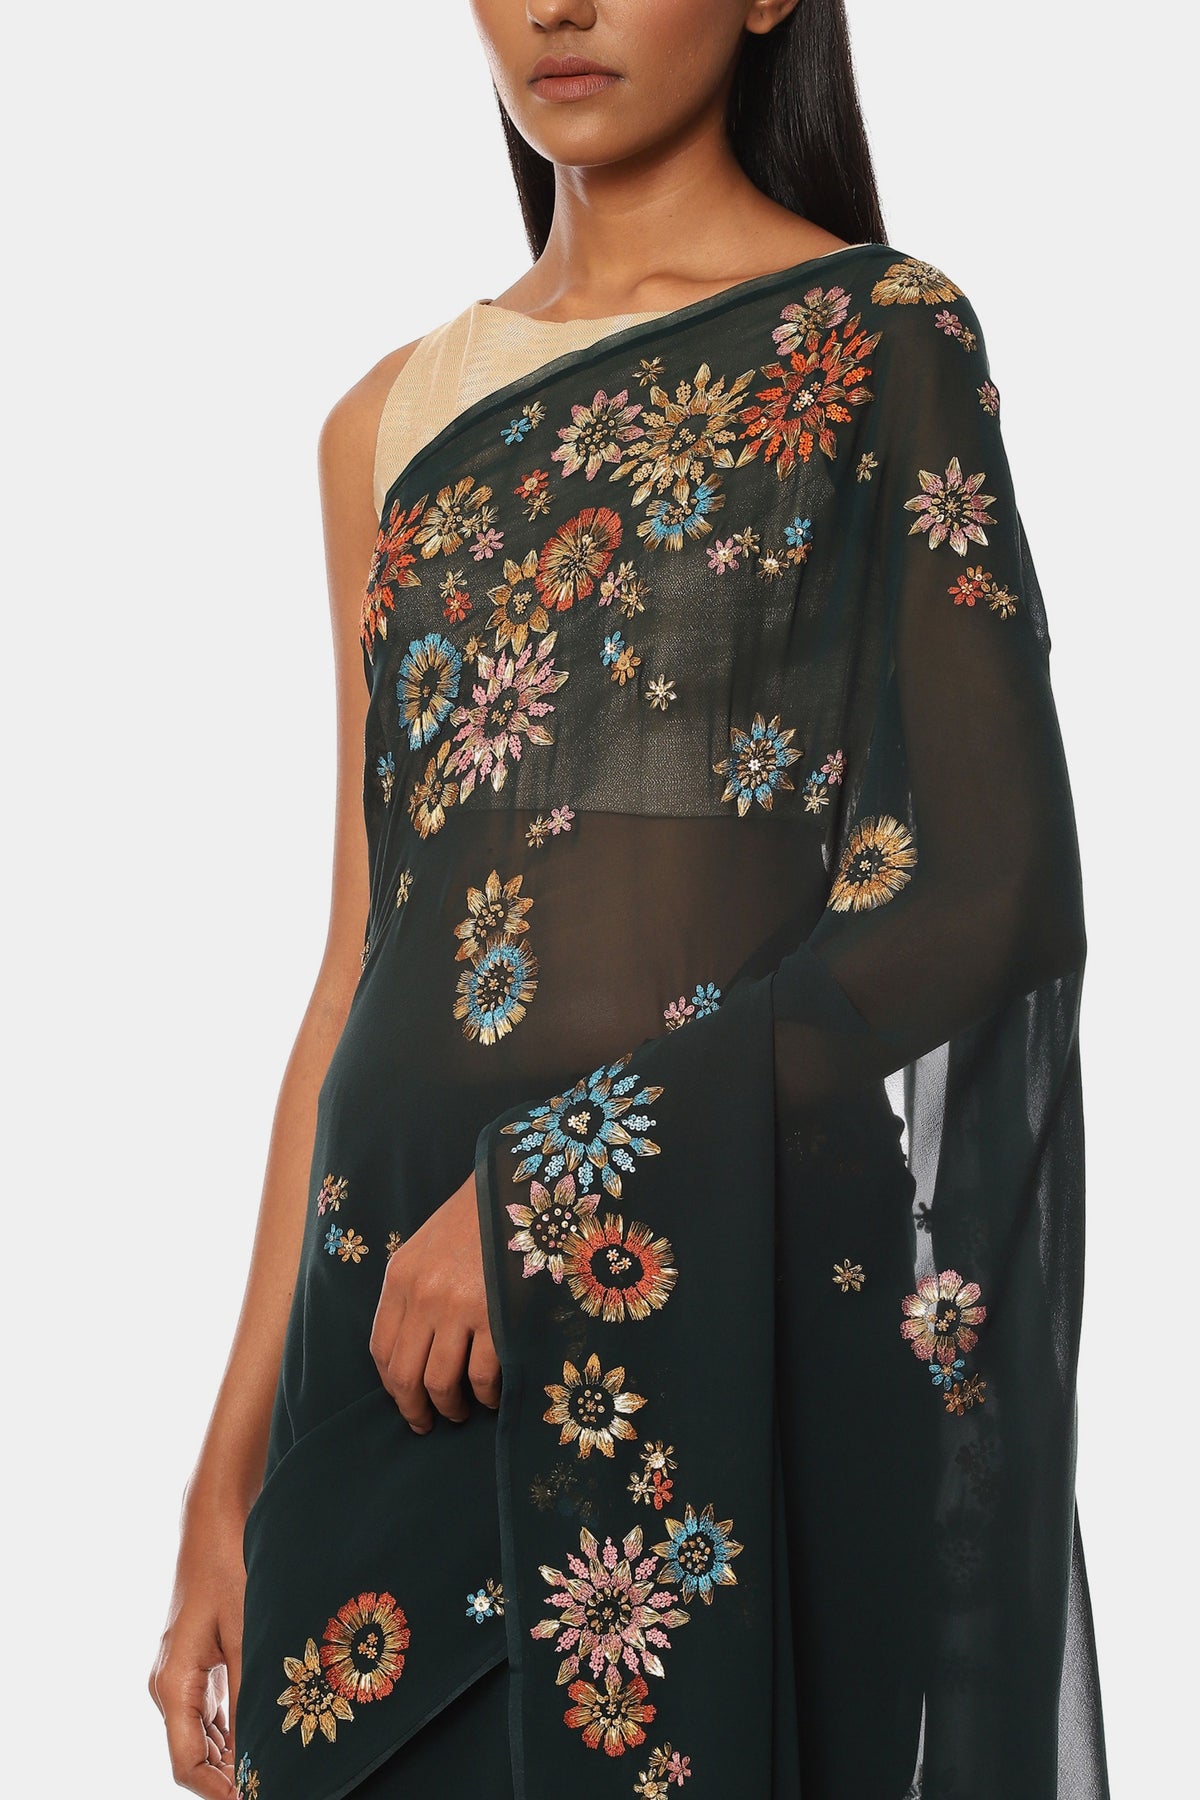 The Embroidered Jungle Queen Saree